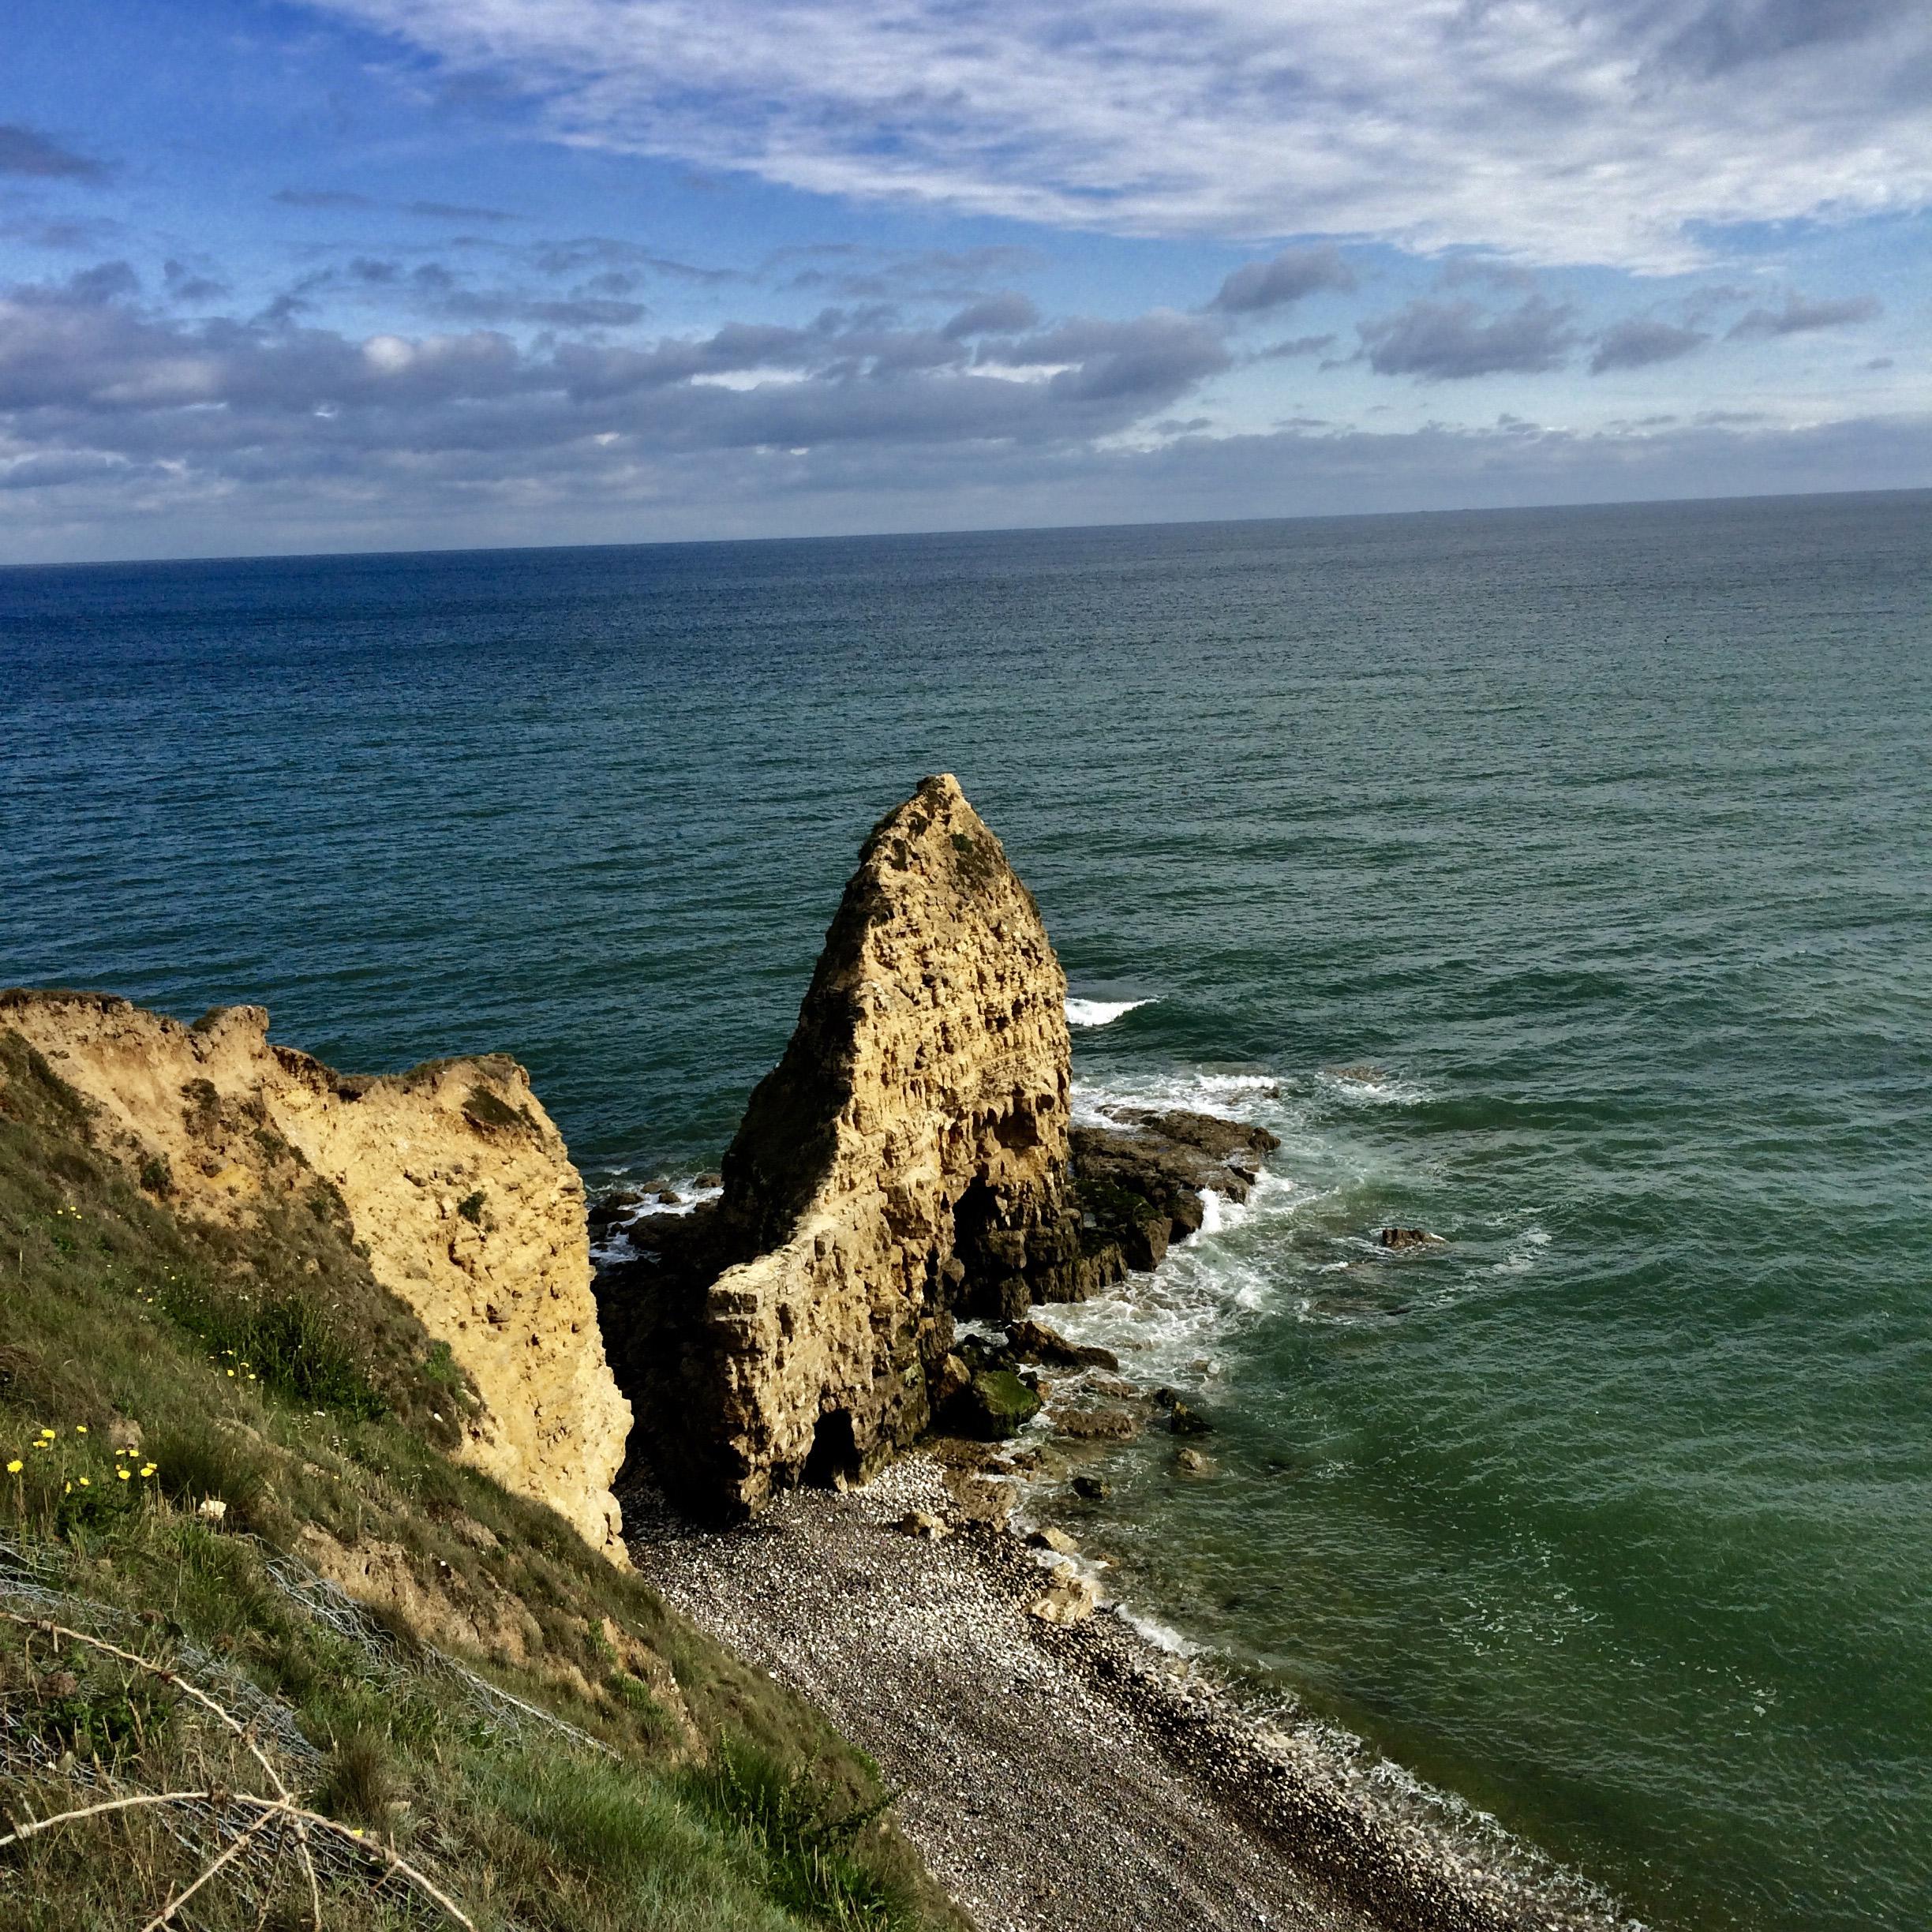 Point du Hoc is on the Normandy Coast, overlooking the English Channel. US army rangers landed on the beach below on D-Day and scaled the cliffs using ropes and ladders